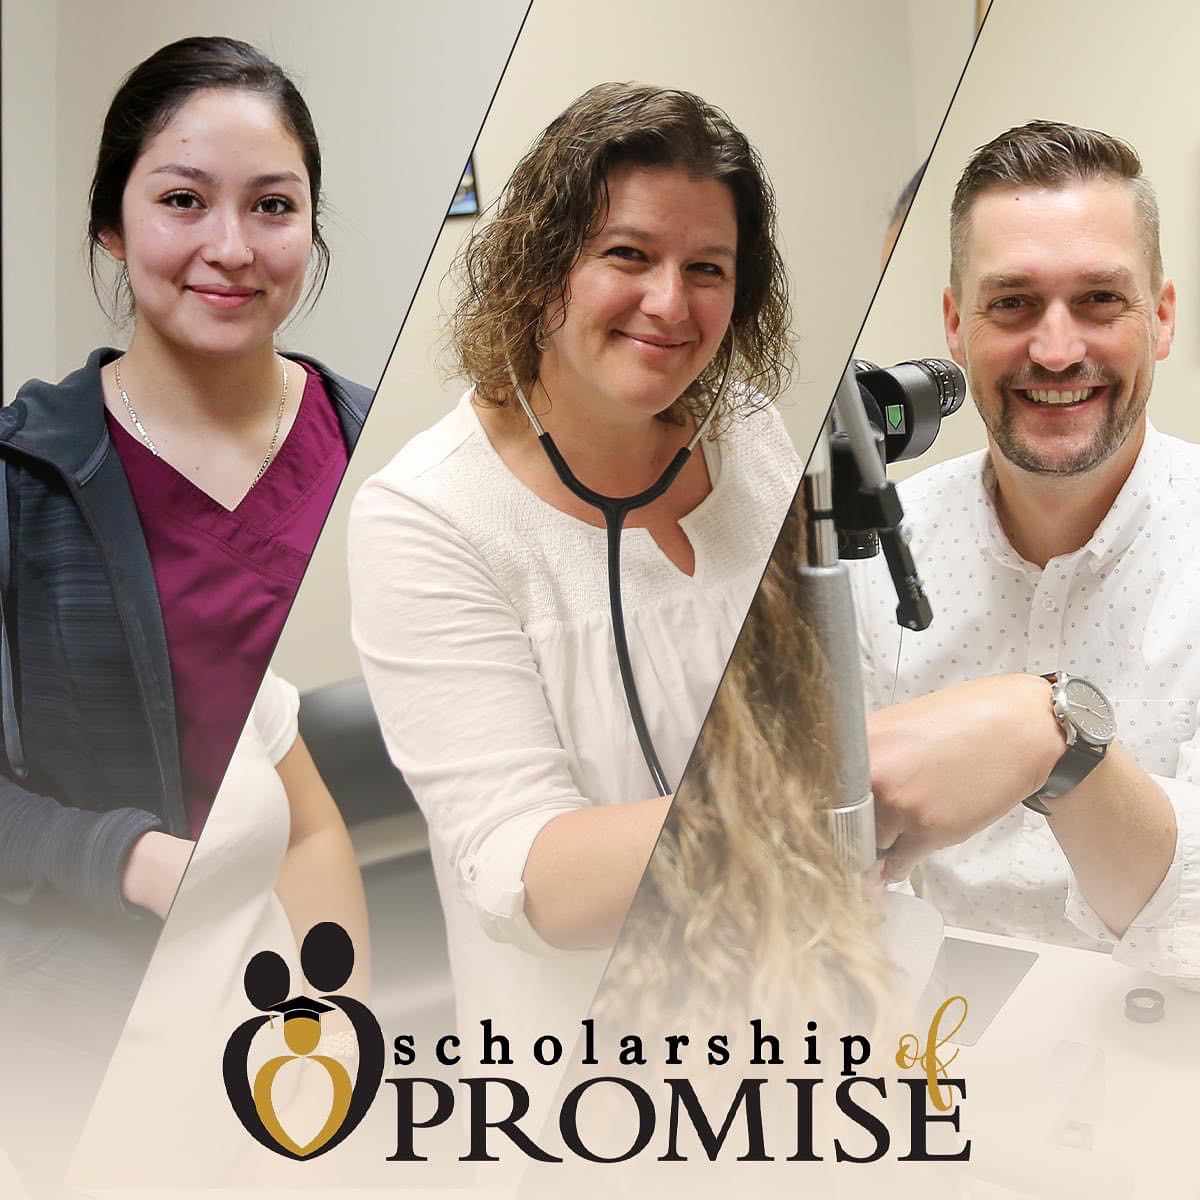 Scholarship of Promise 2024 | Promise Community Health Center in Sioux Center, Iowa | Federally Qualified Health Center serving northwest Iowa | Promise offers medical care, prenatal care, behavioral healthcare, population health care, health coaching as well as dental and vision care.